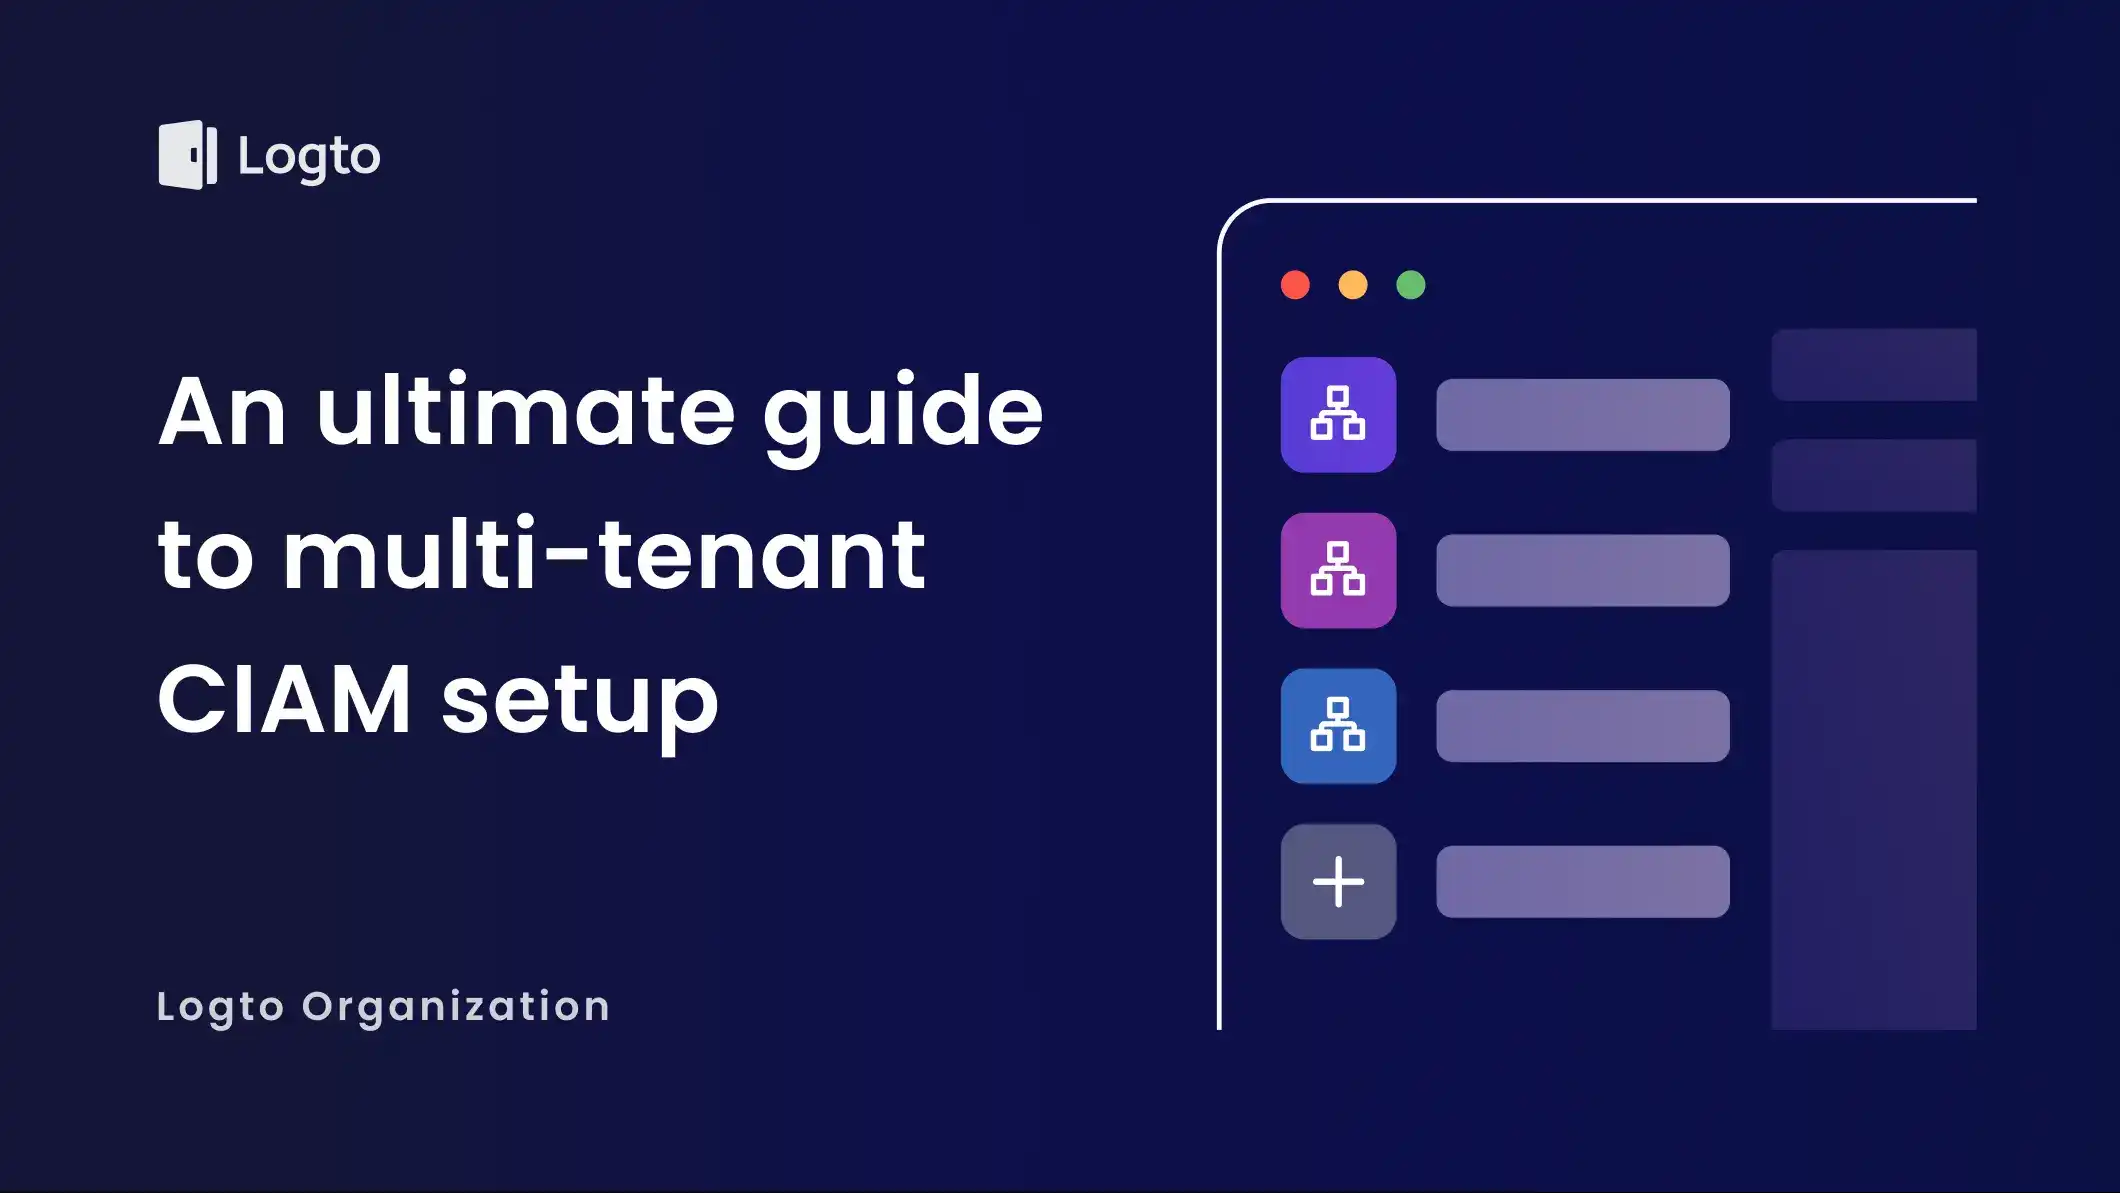 An ultimate guide to multi-tenant CIAM setup